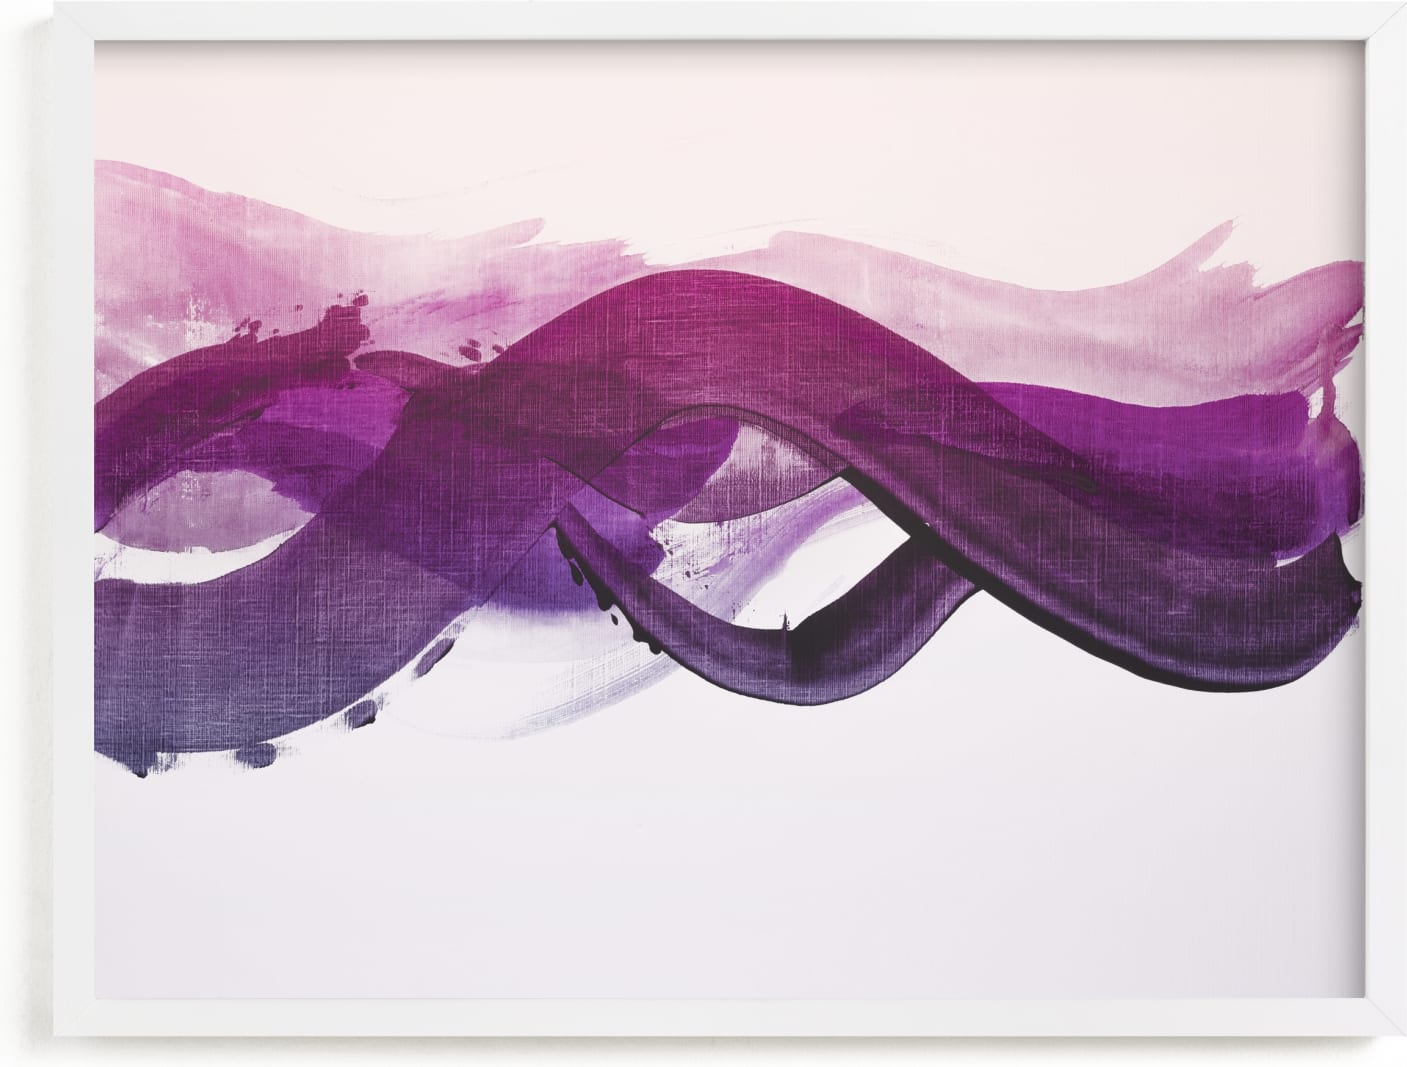 This is a purple art by Amy Gray called Rivulet.